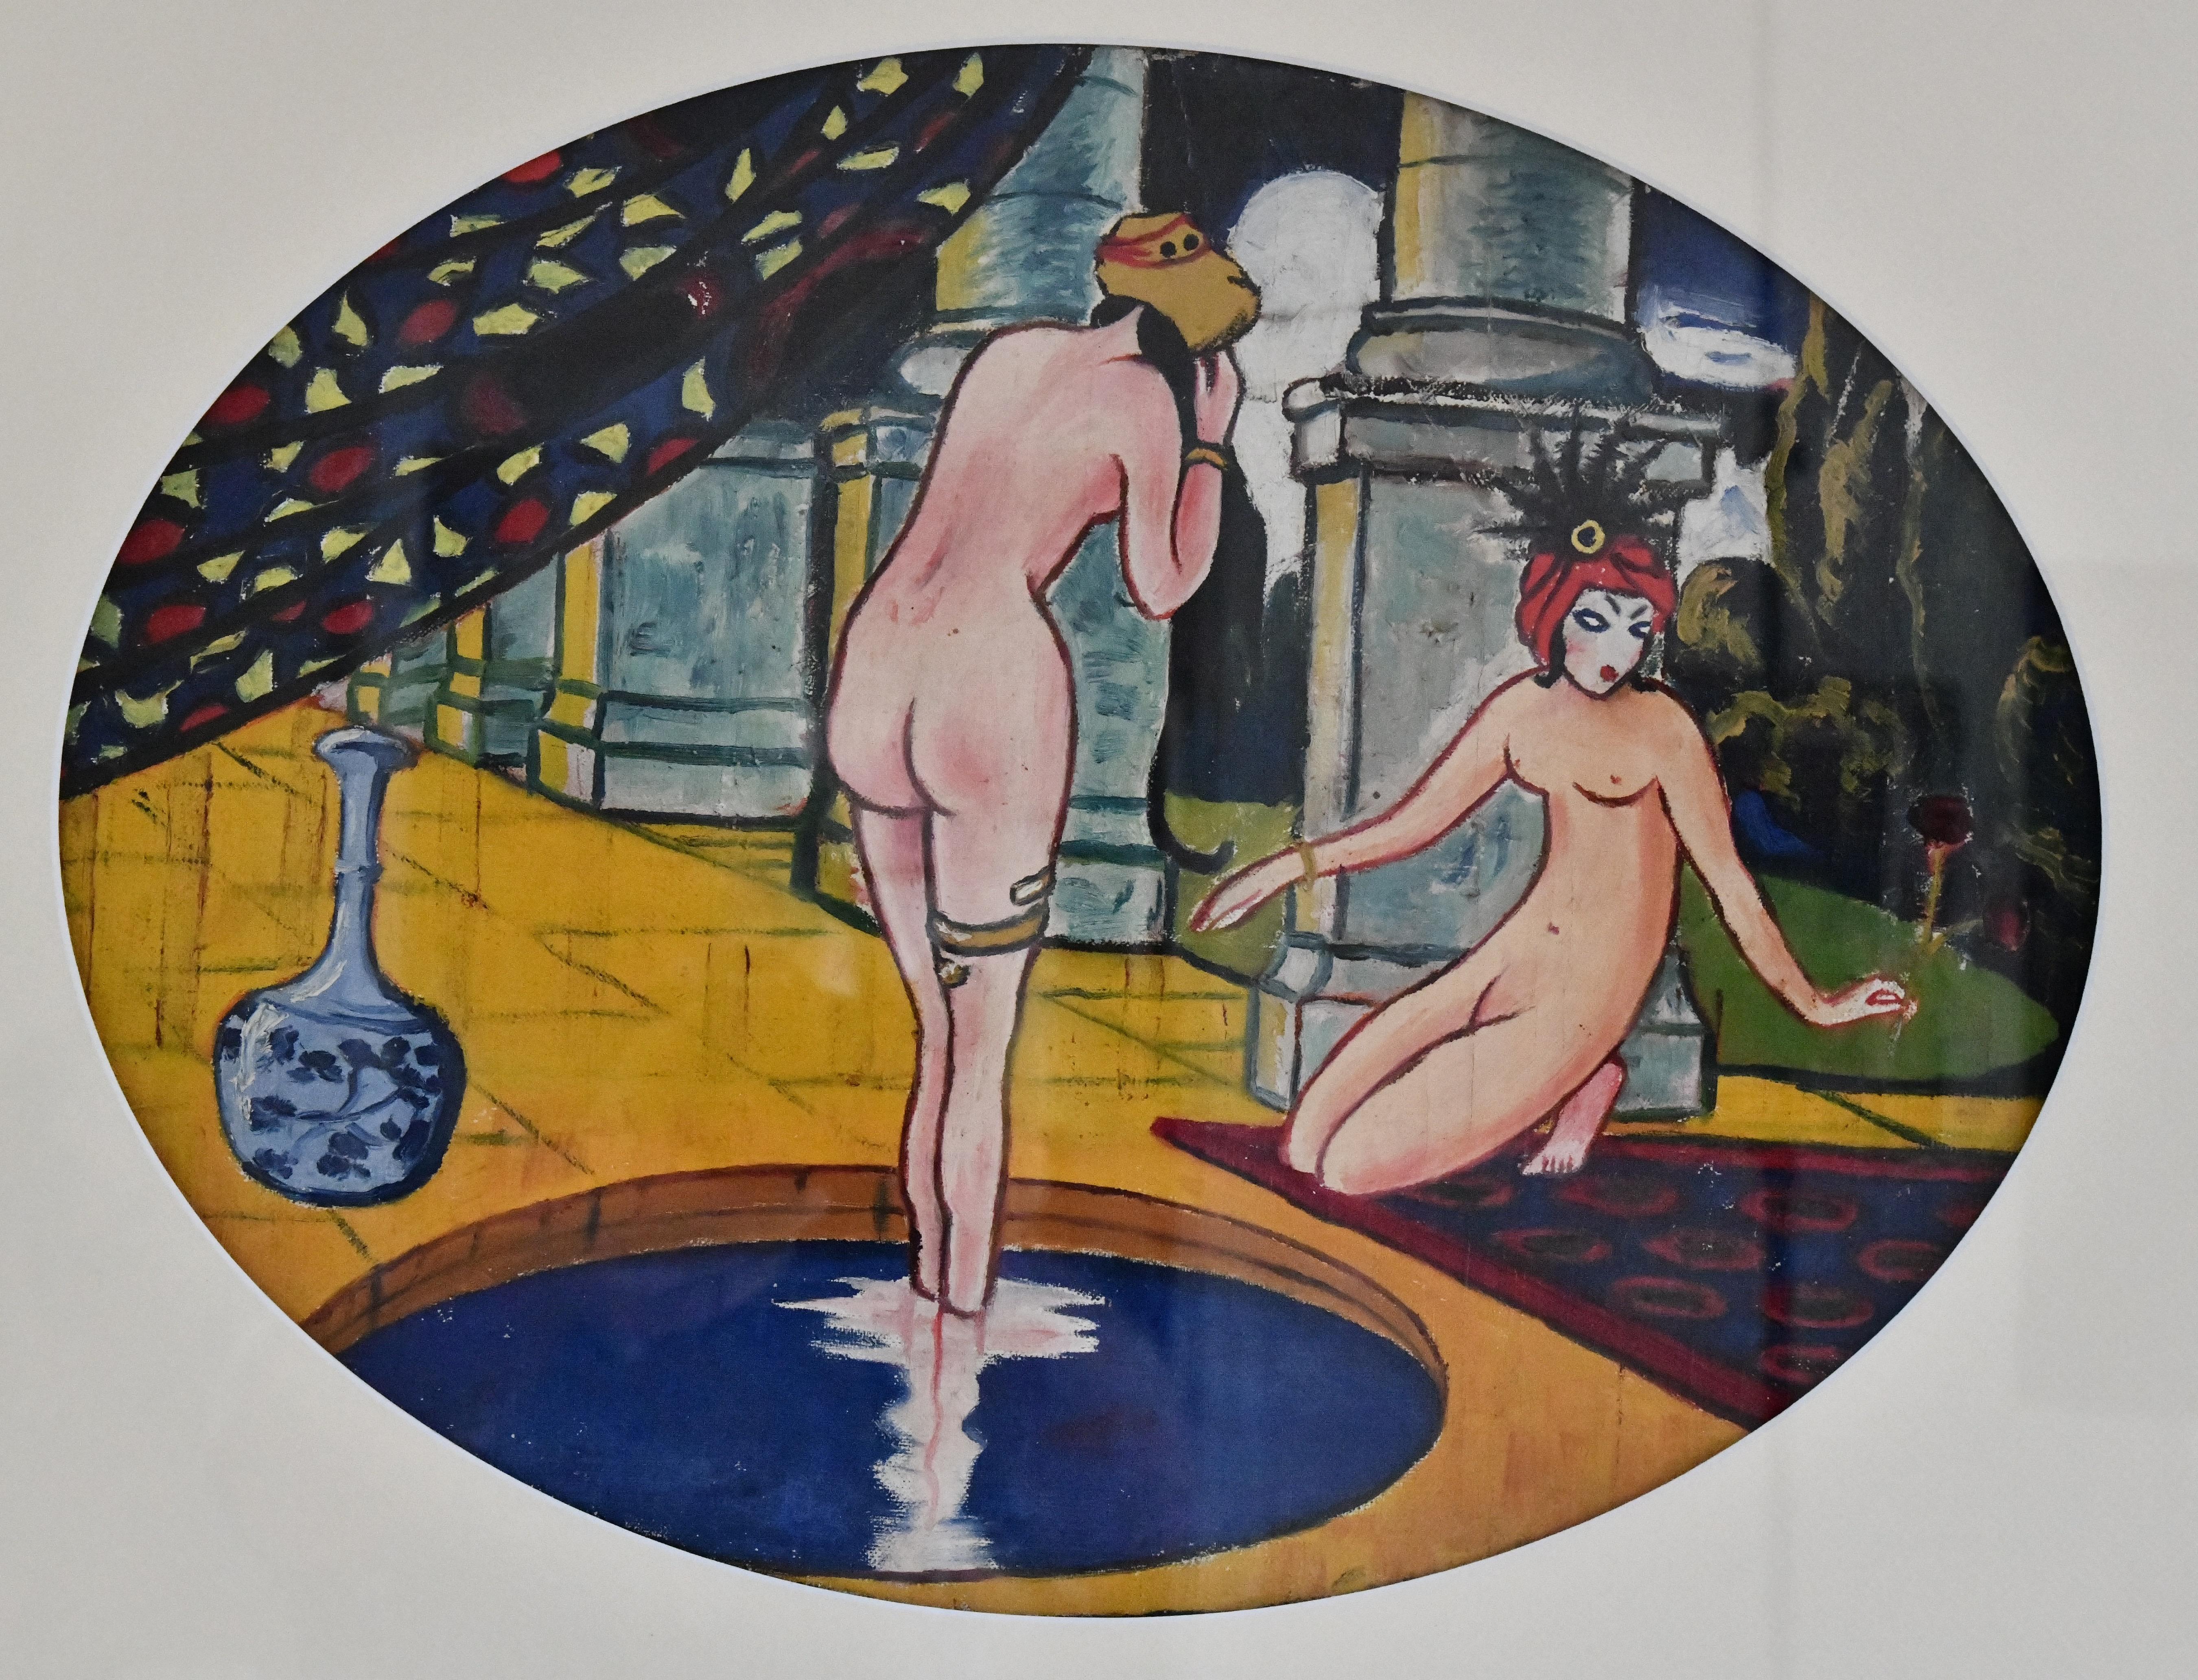 Art Deco painting with nudes.
Oval shaped painting with two nude bathers, contemporary frame.
Colors pink, yellow, red, grey and blue. 
France 1930. 